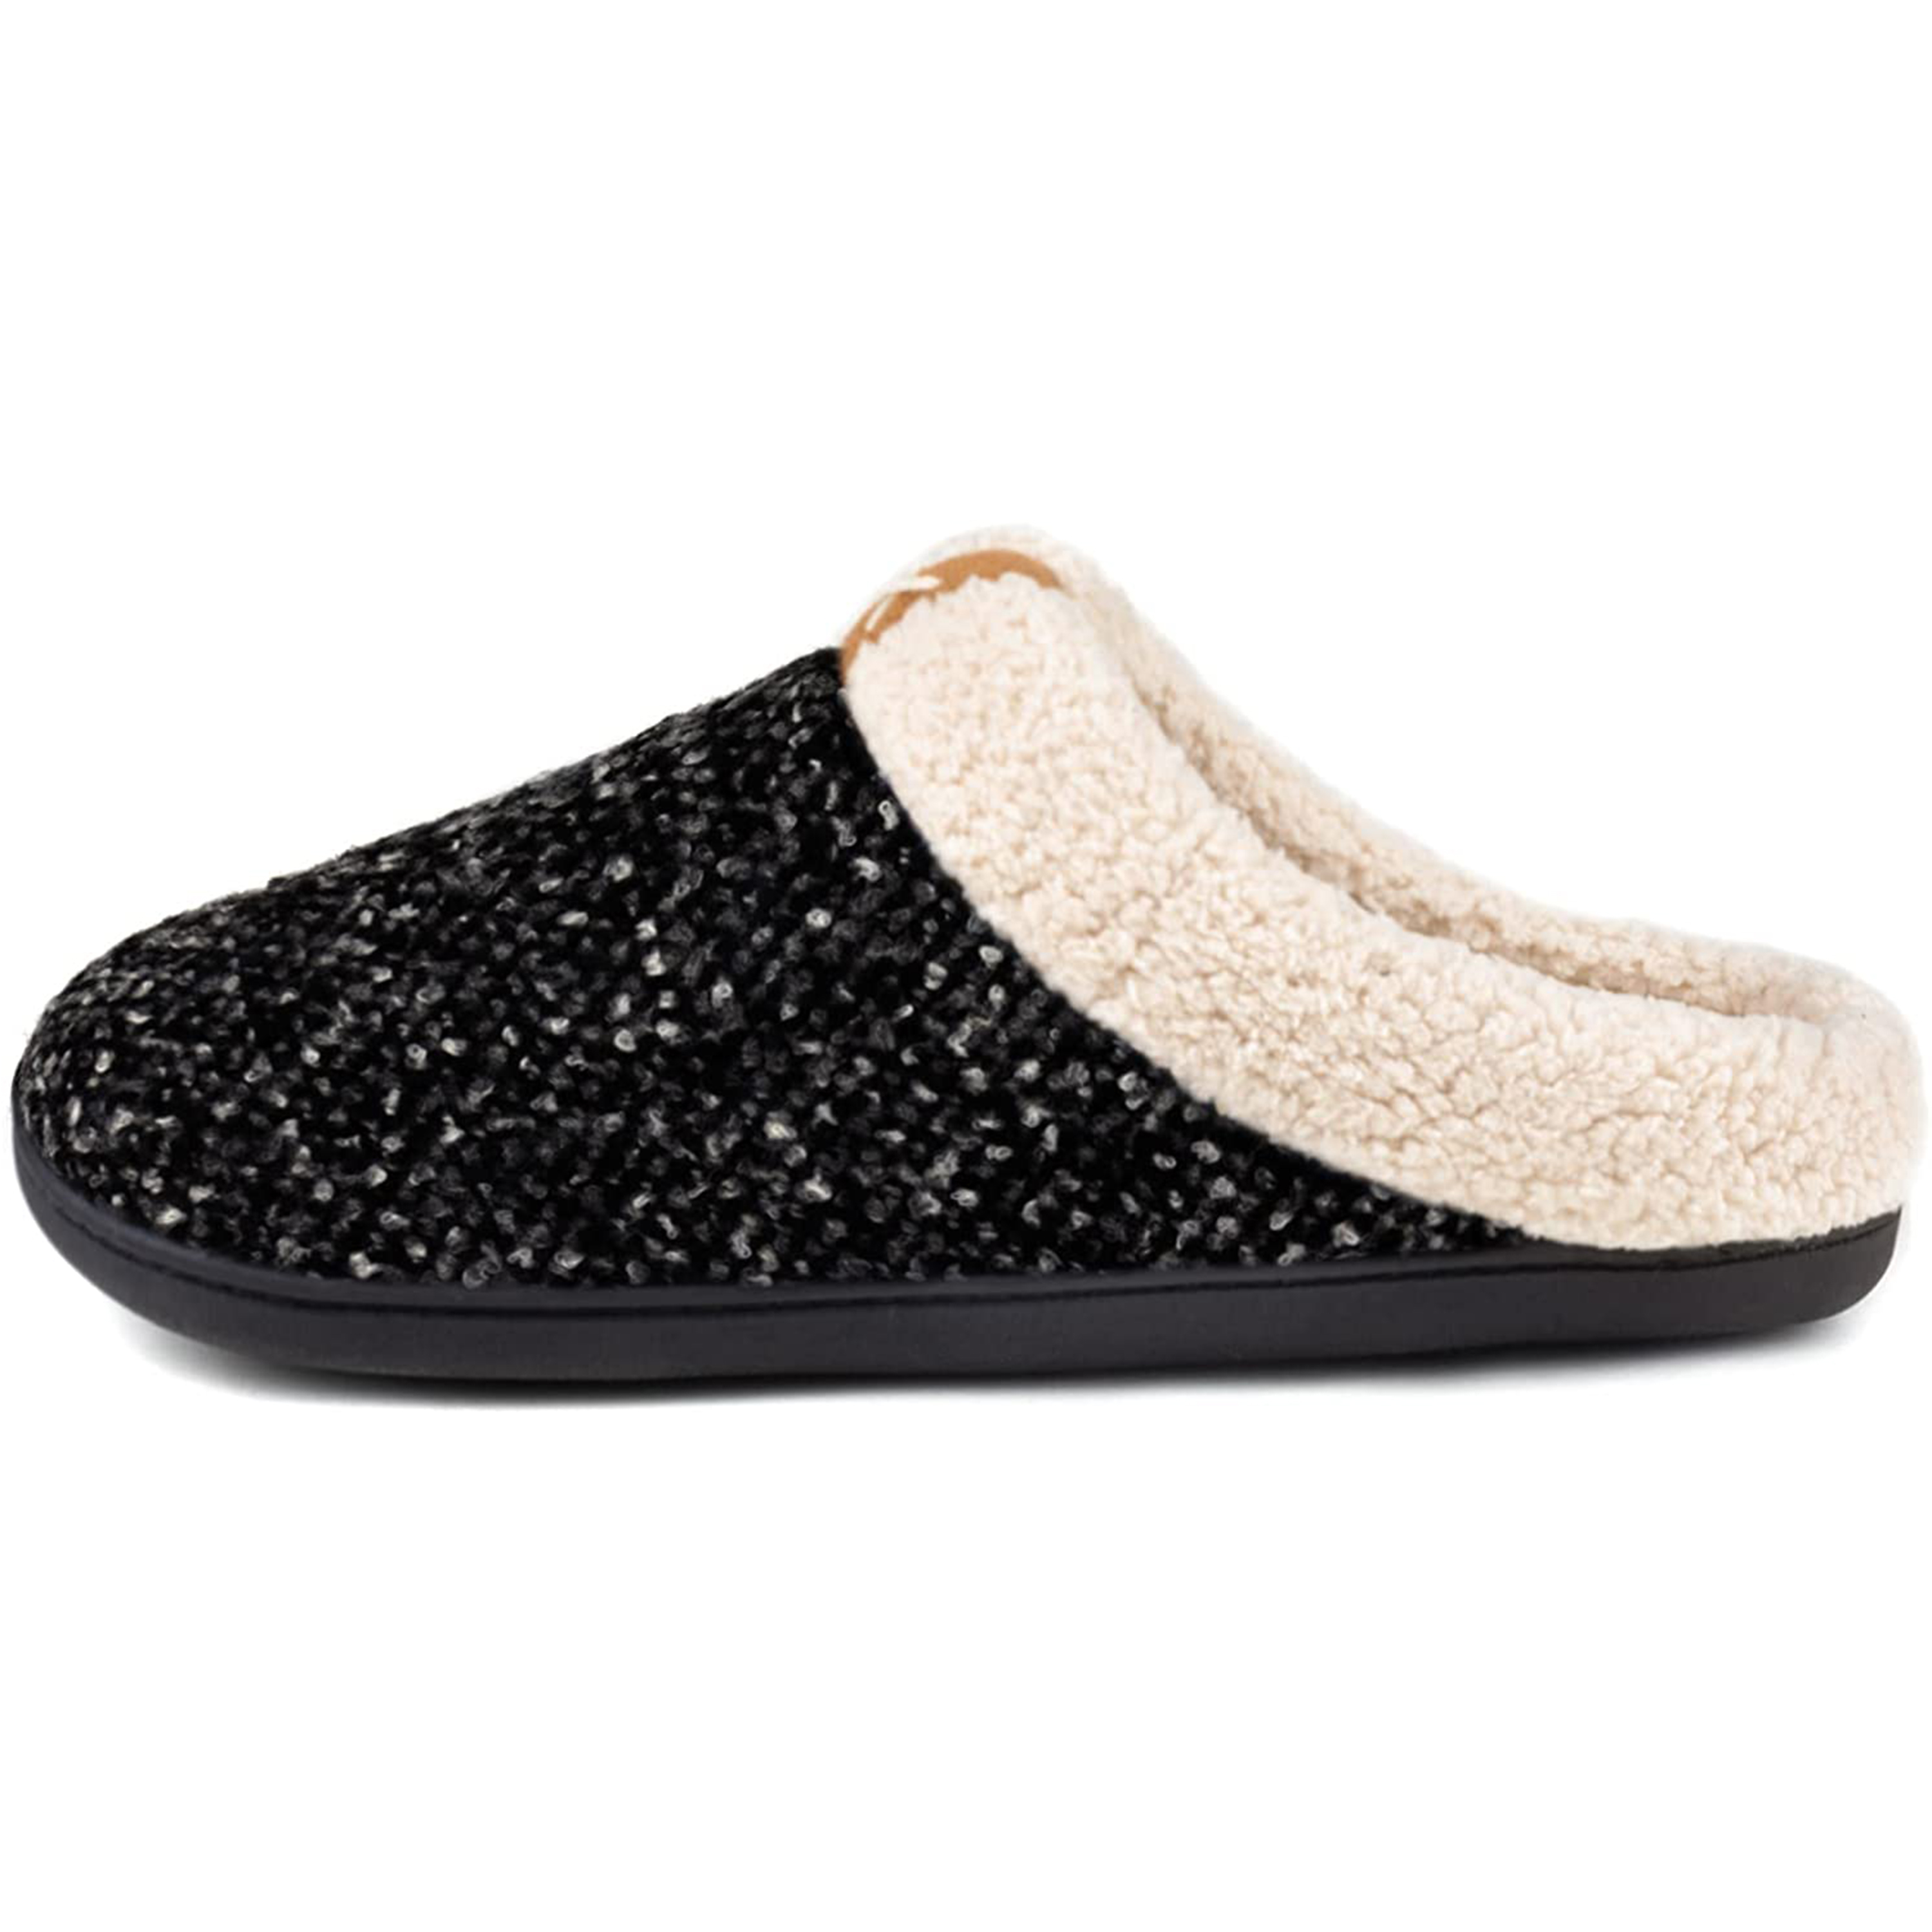 Men's Cozy Memory Foam Slippers with Fuzzy Plush Wool-Like Lining, Slip on Clog House Shoes with Indoor Outdoor Anti-Skid Rubber Sole - image 3 of 5